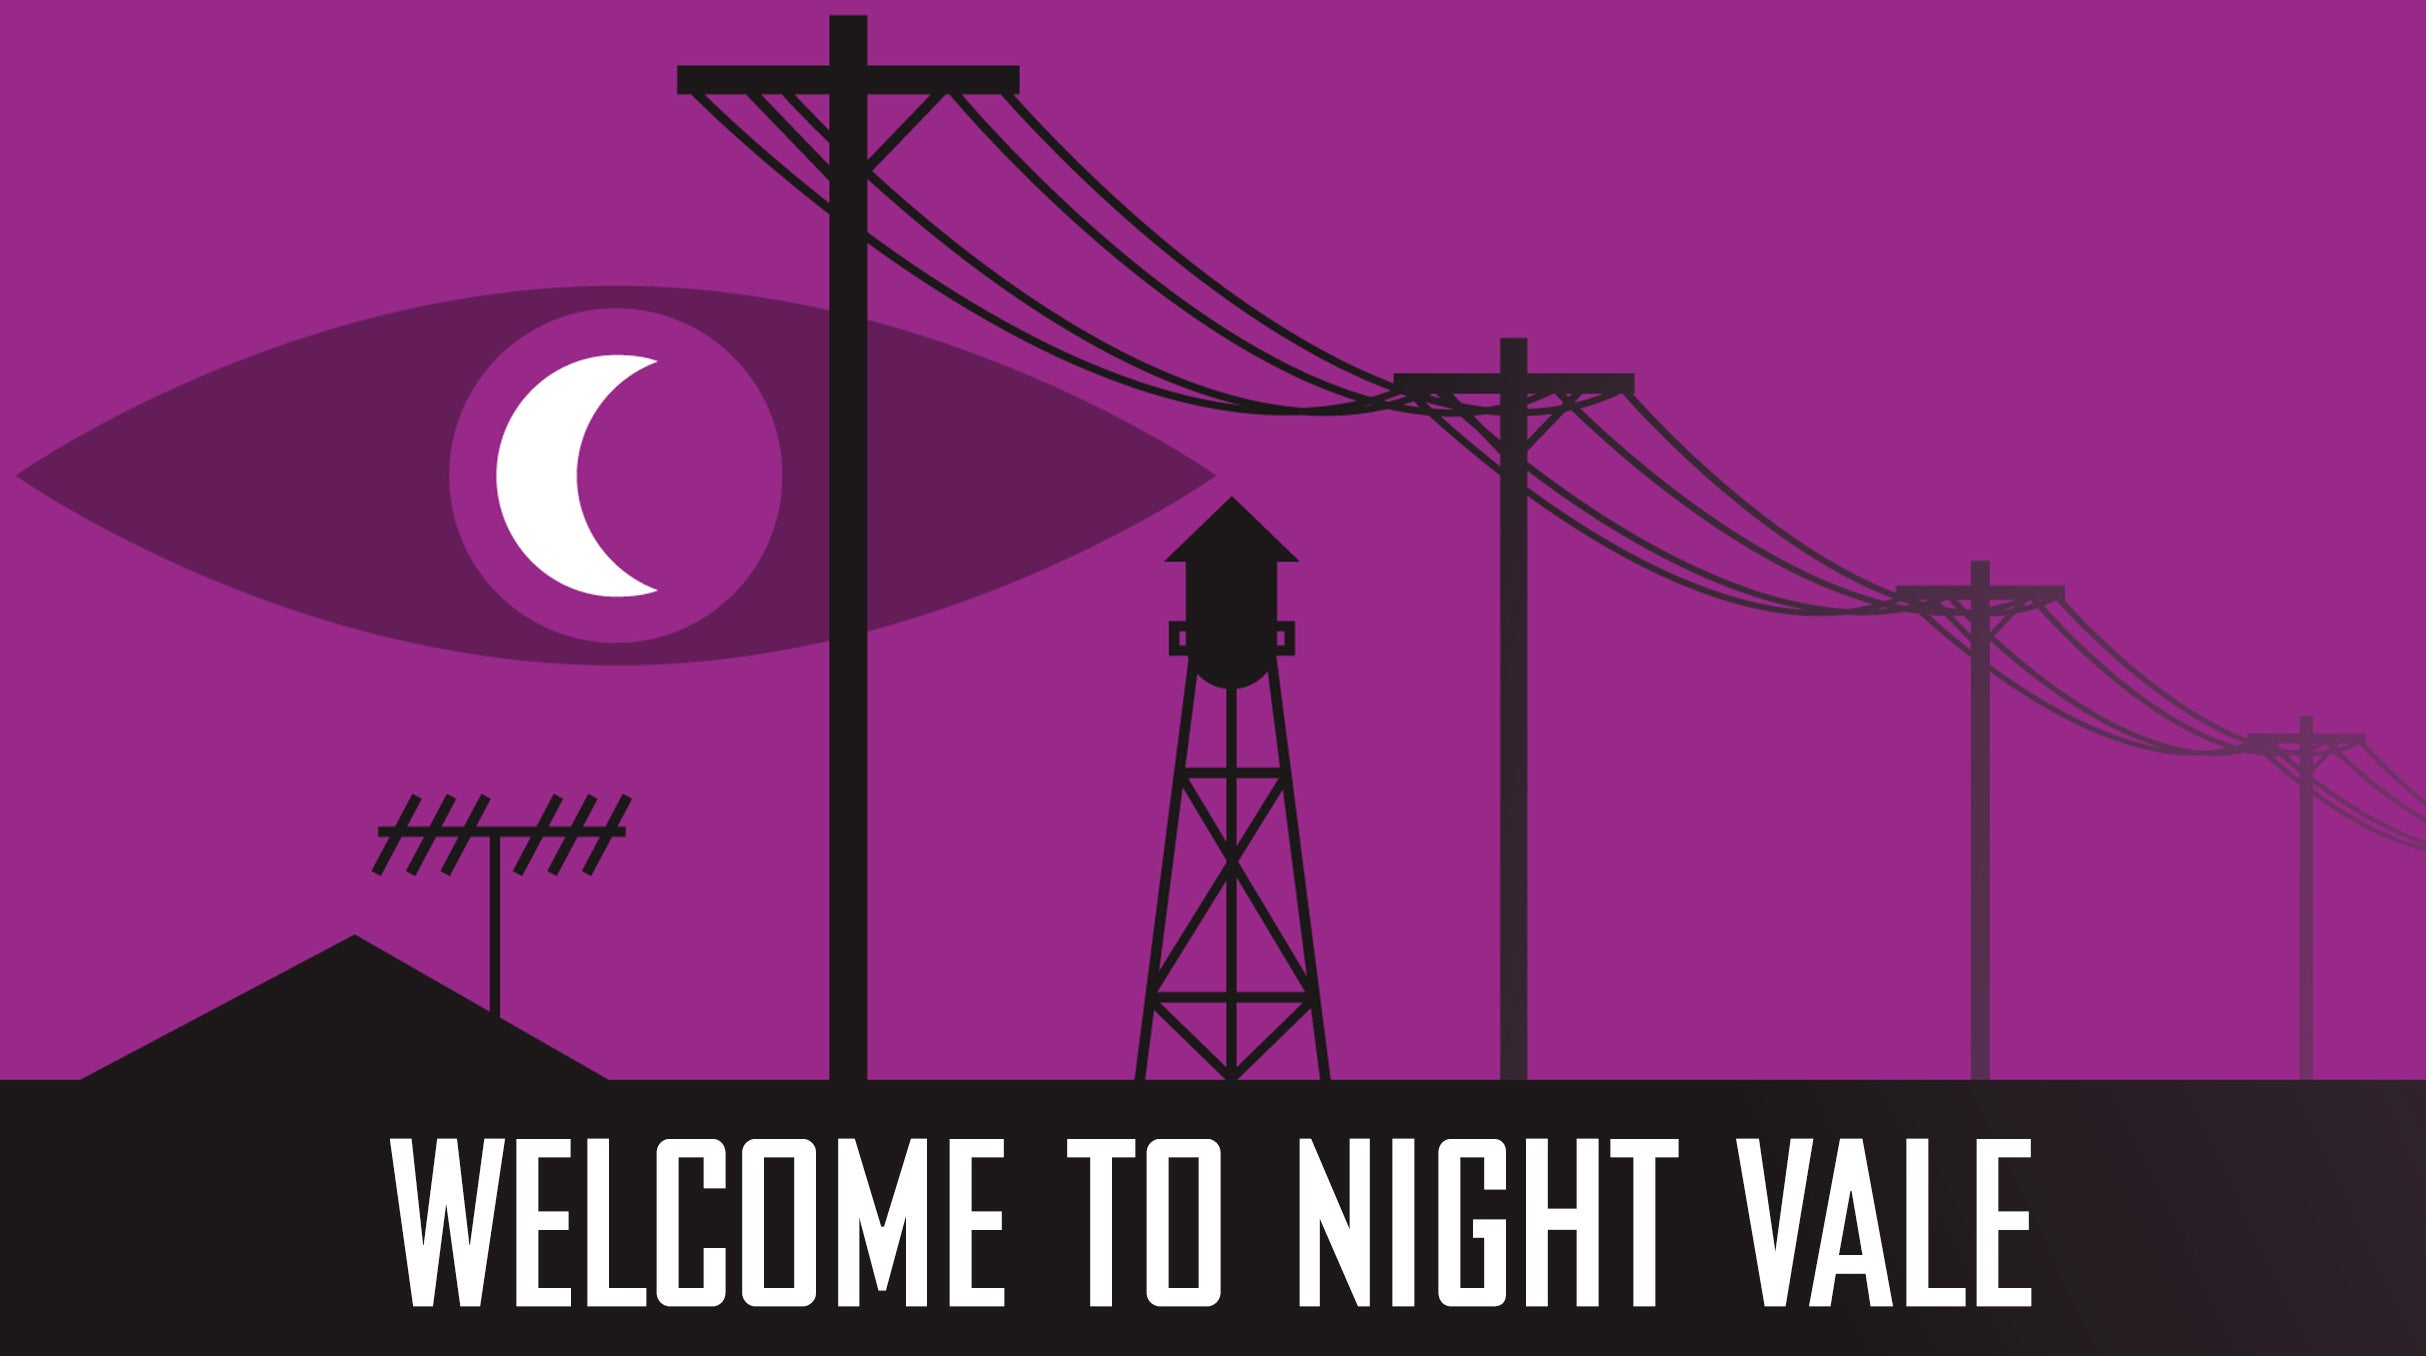 Welcome To Night Vale @ Rialto Theatre in Tucson promo photo for Patreon presale offer code